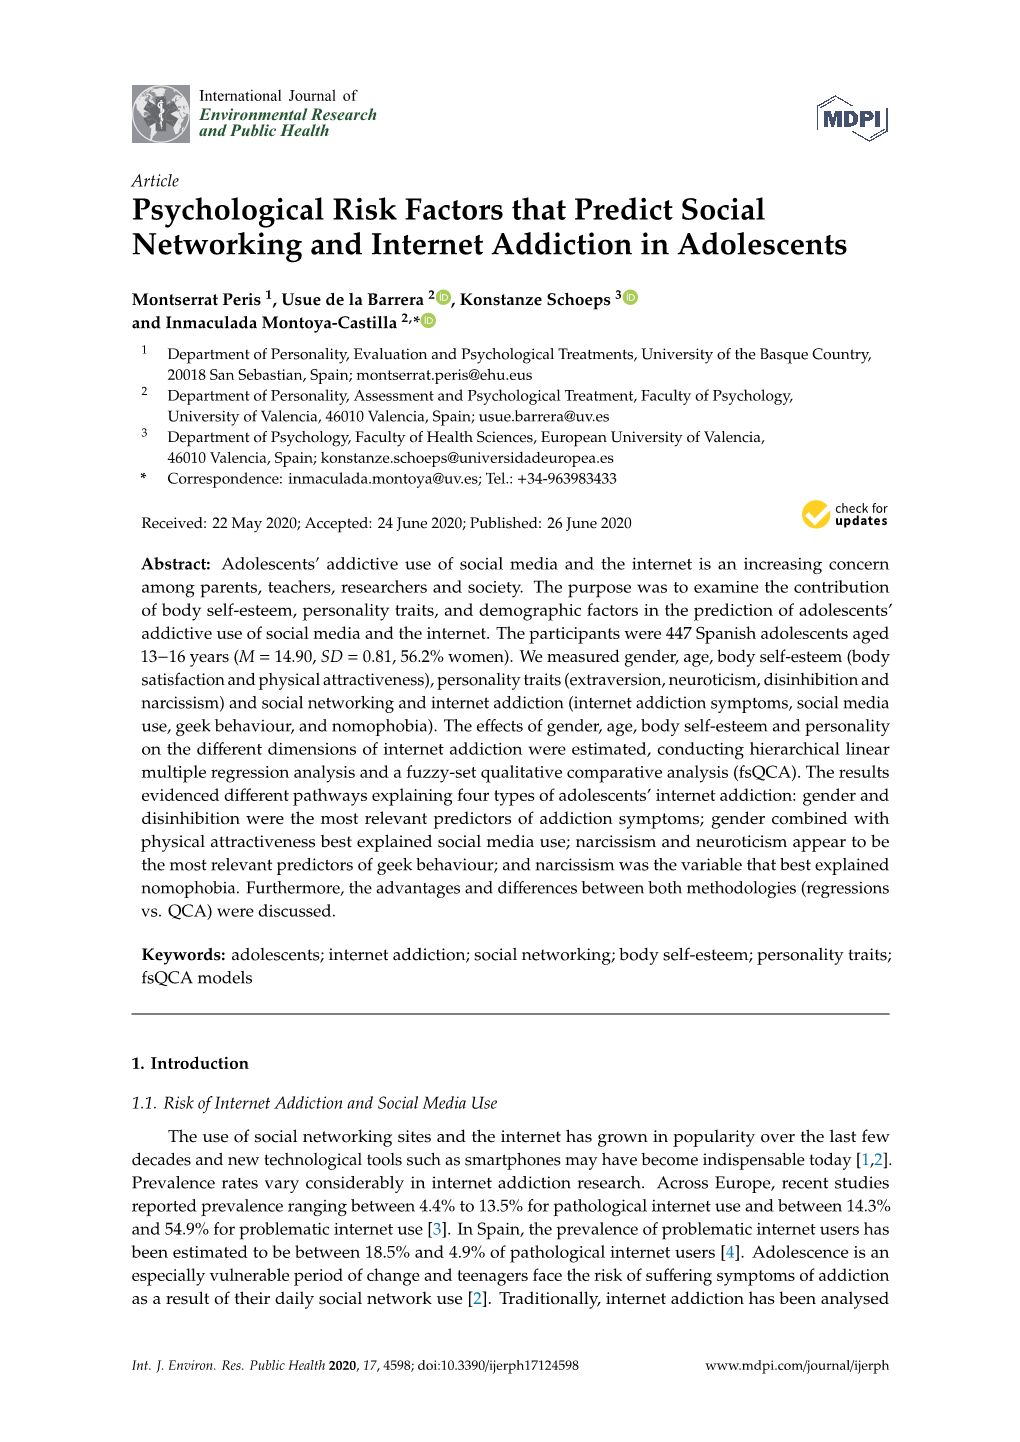 Psychological Risk Factors That Predict Social Networking and Internet Addiction in Adolescents